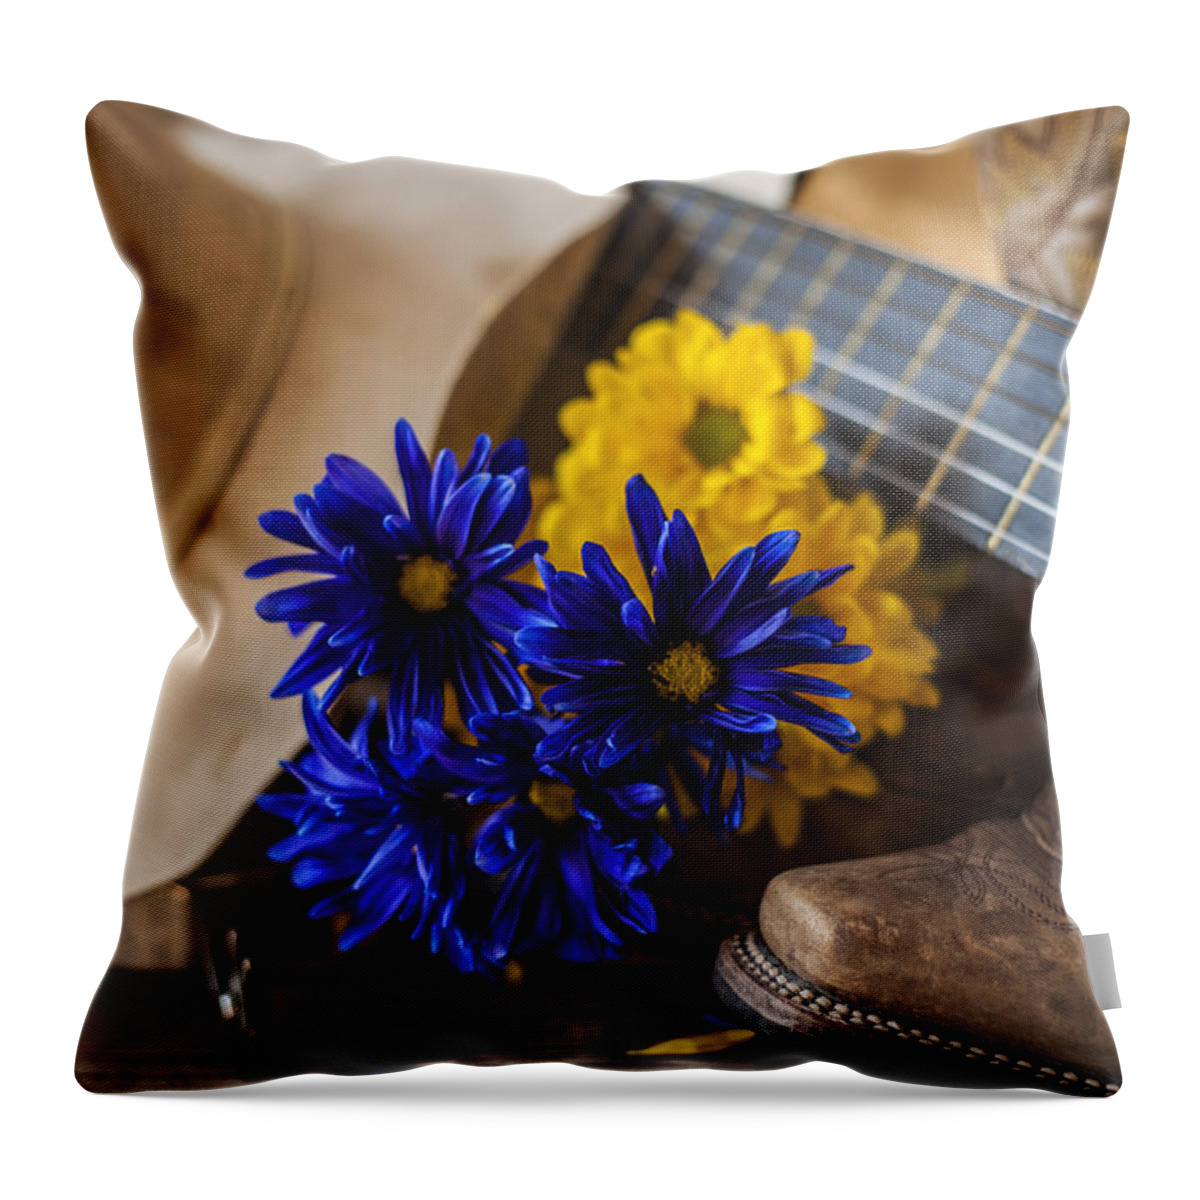 Still Life Throw Pillow featuring the photograph Cowgirl Music by Amber Kresge